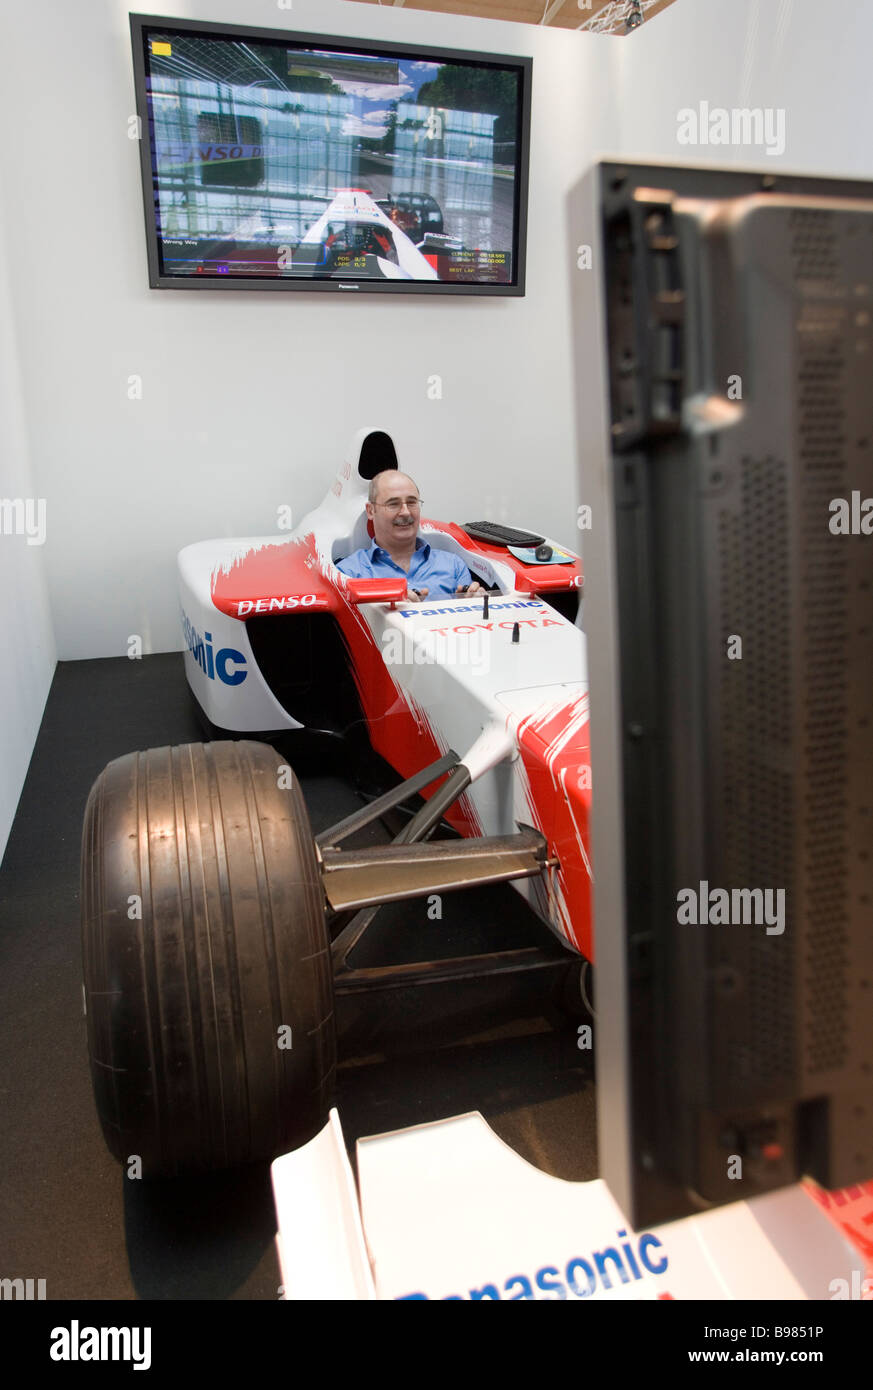 CeBIT visitor during a virtual motor racing in a racing car Stock Photo